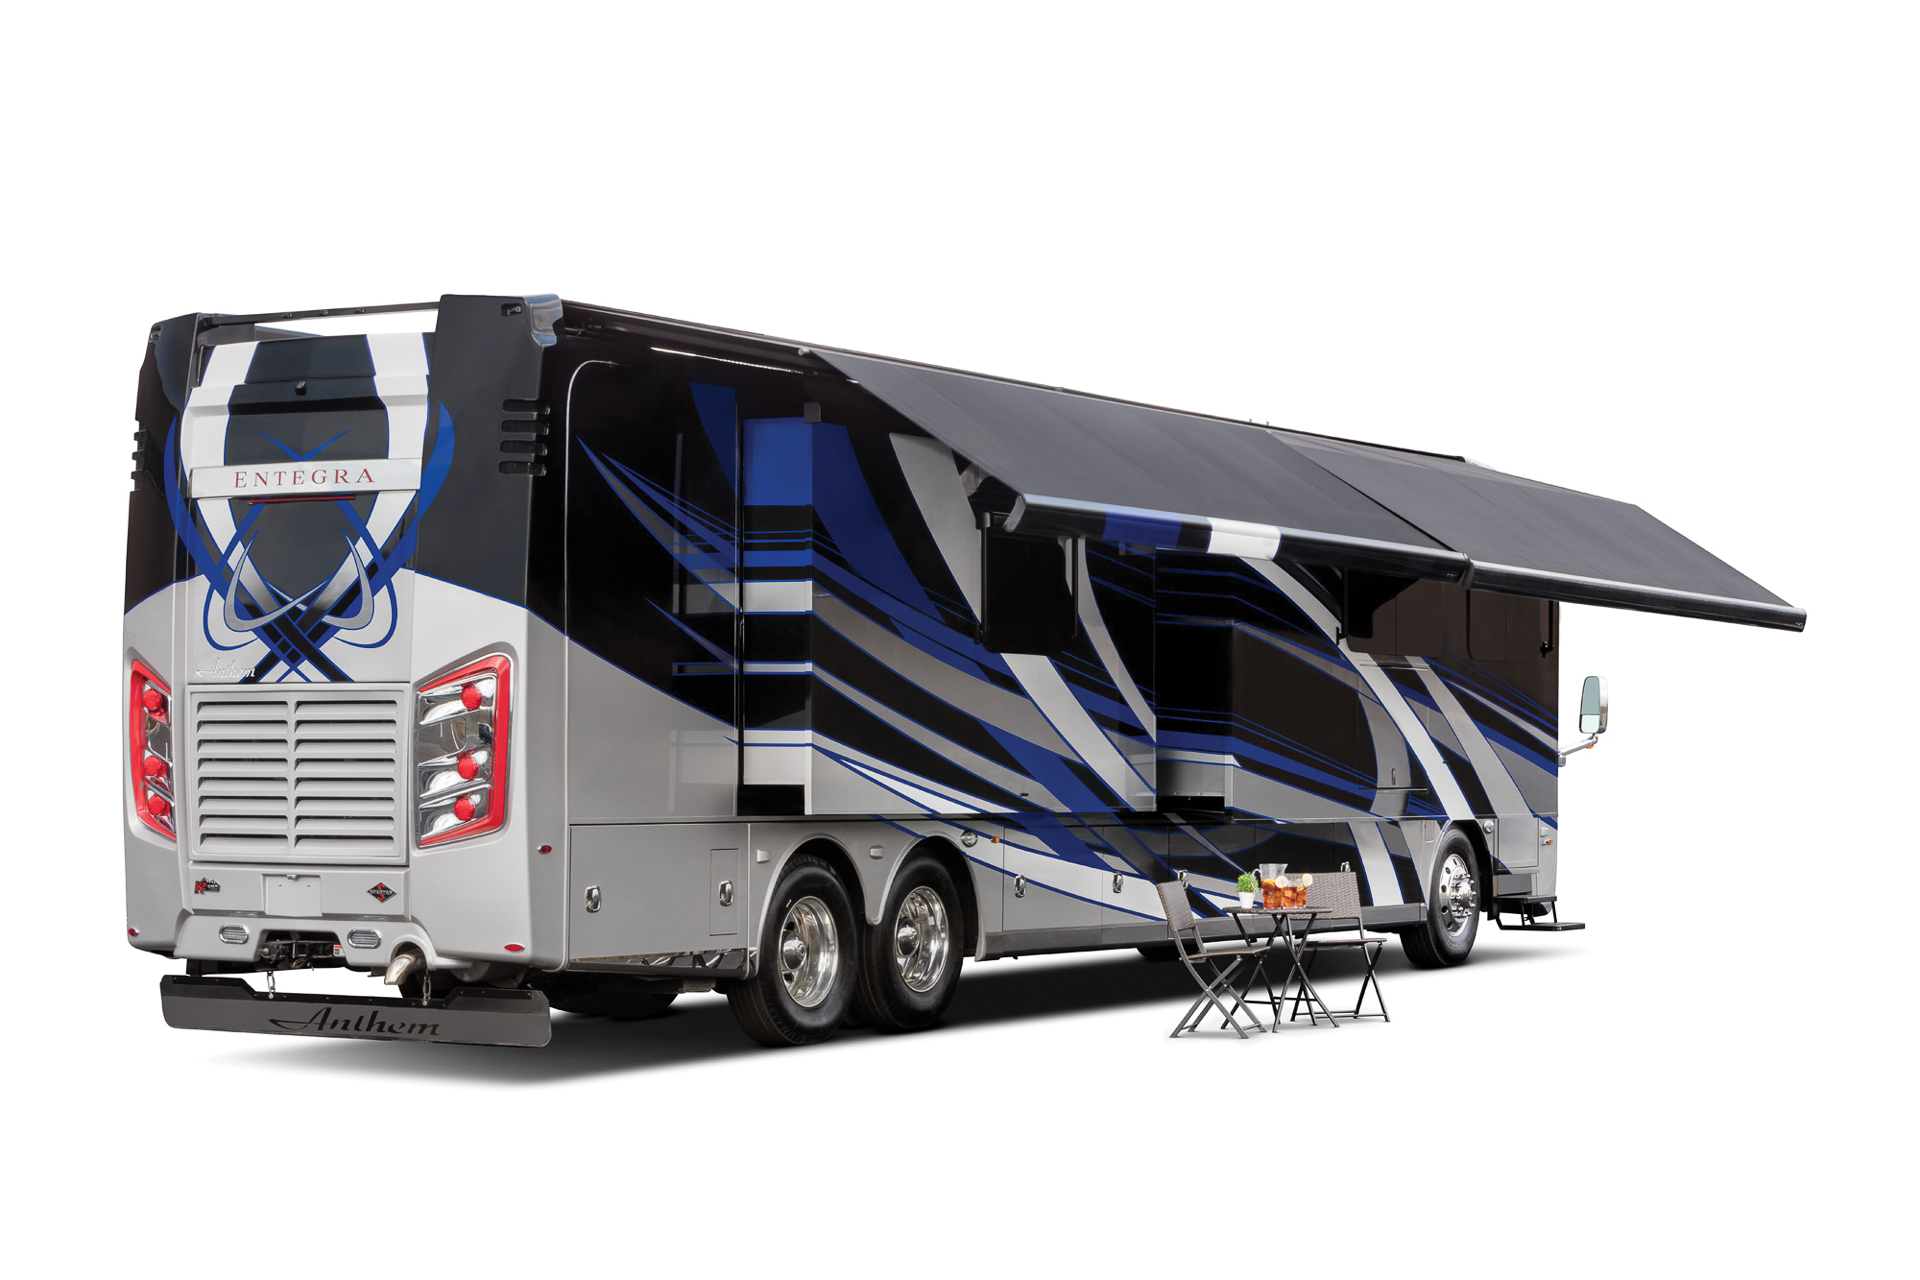 9 Rv S For Any Budget Lifestyle